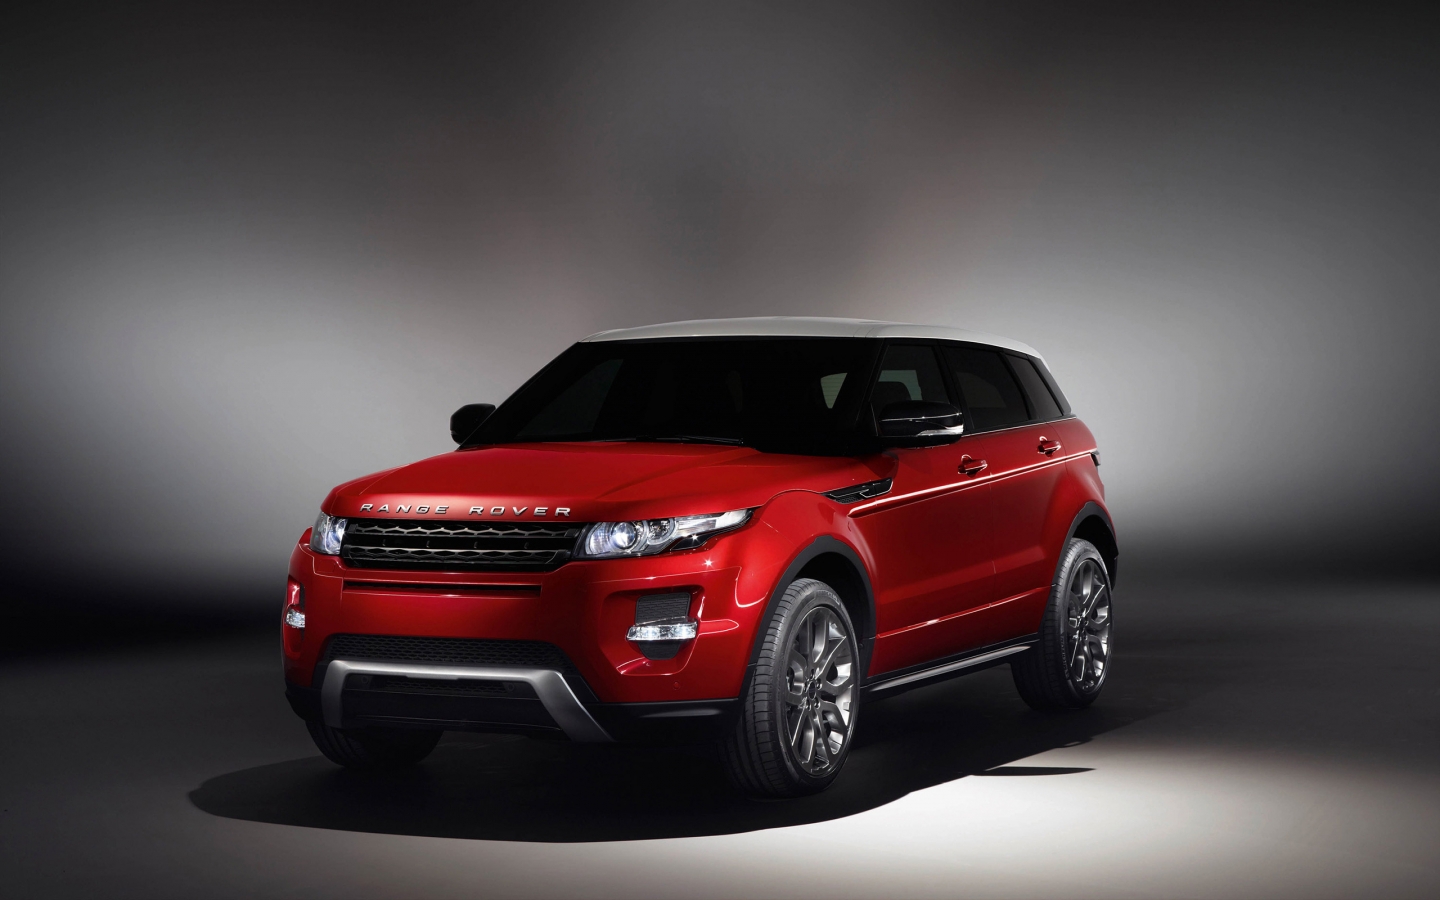 2012 Range Rover Evoque Red for 1440 x 900 widescreen resolution